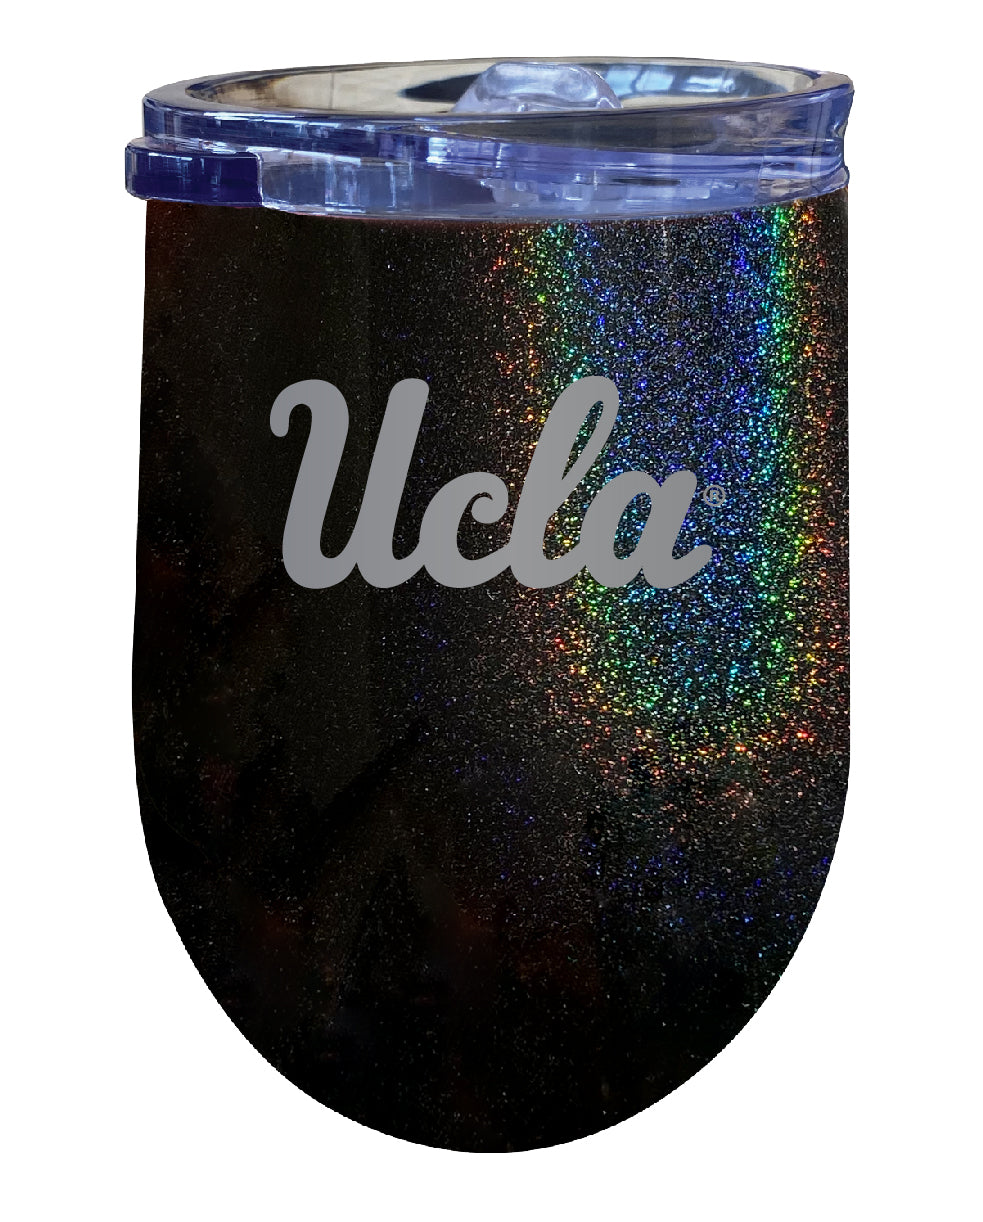 UCLA Bruins 12 oz Laser Etched Insulated Wine Stainless Steel Tumbler Rainbow Glitter Black